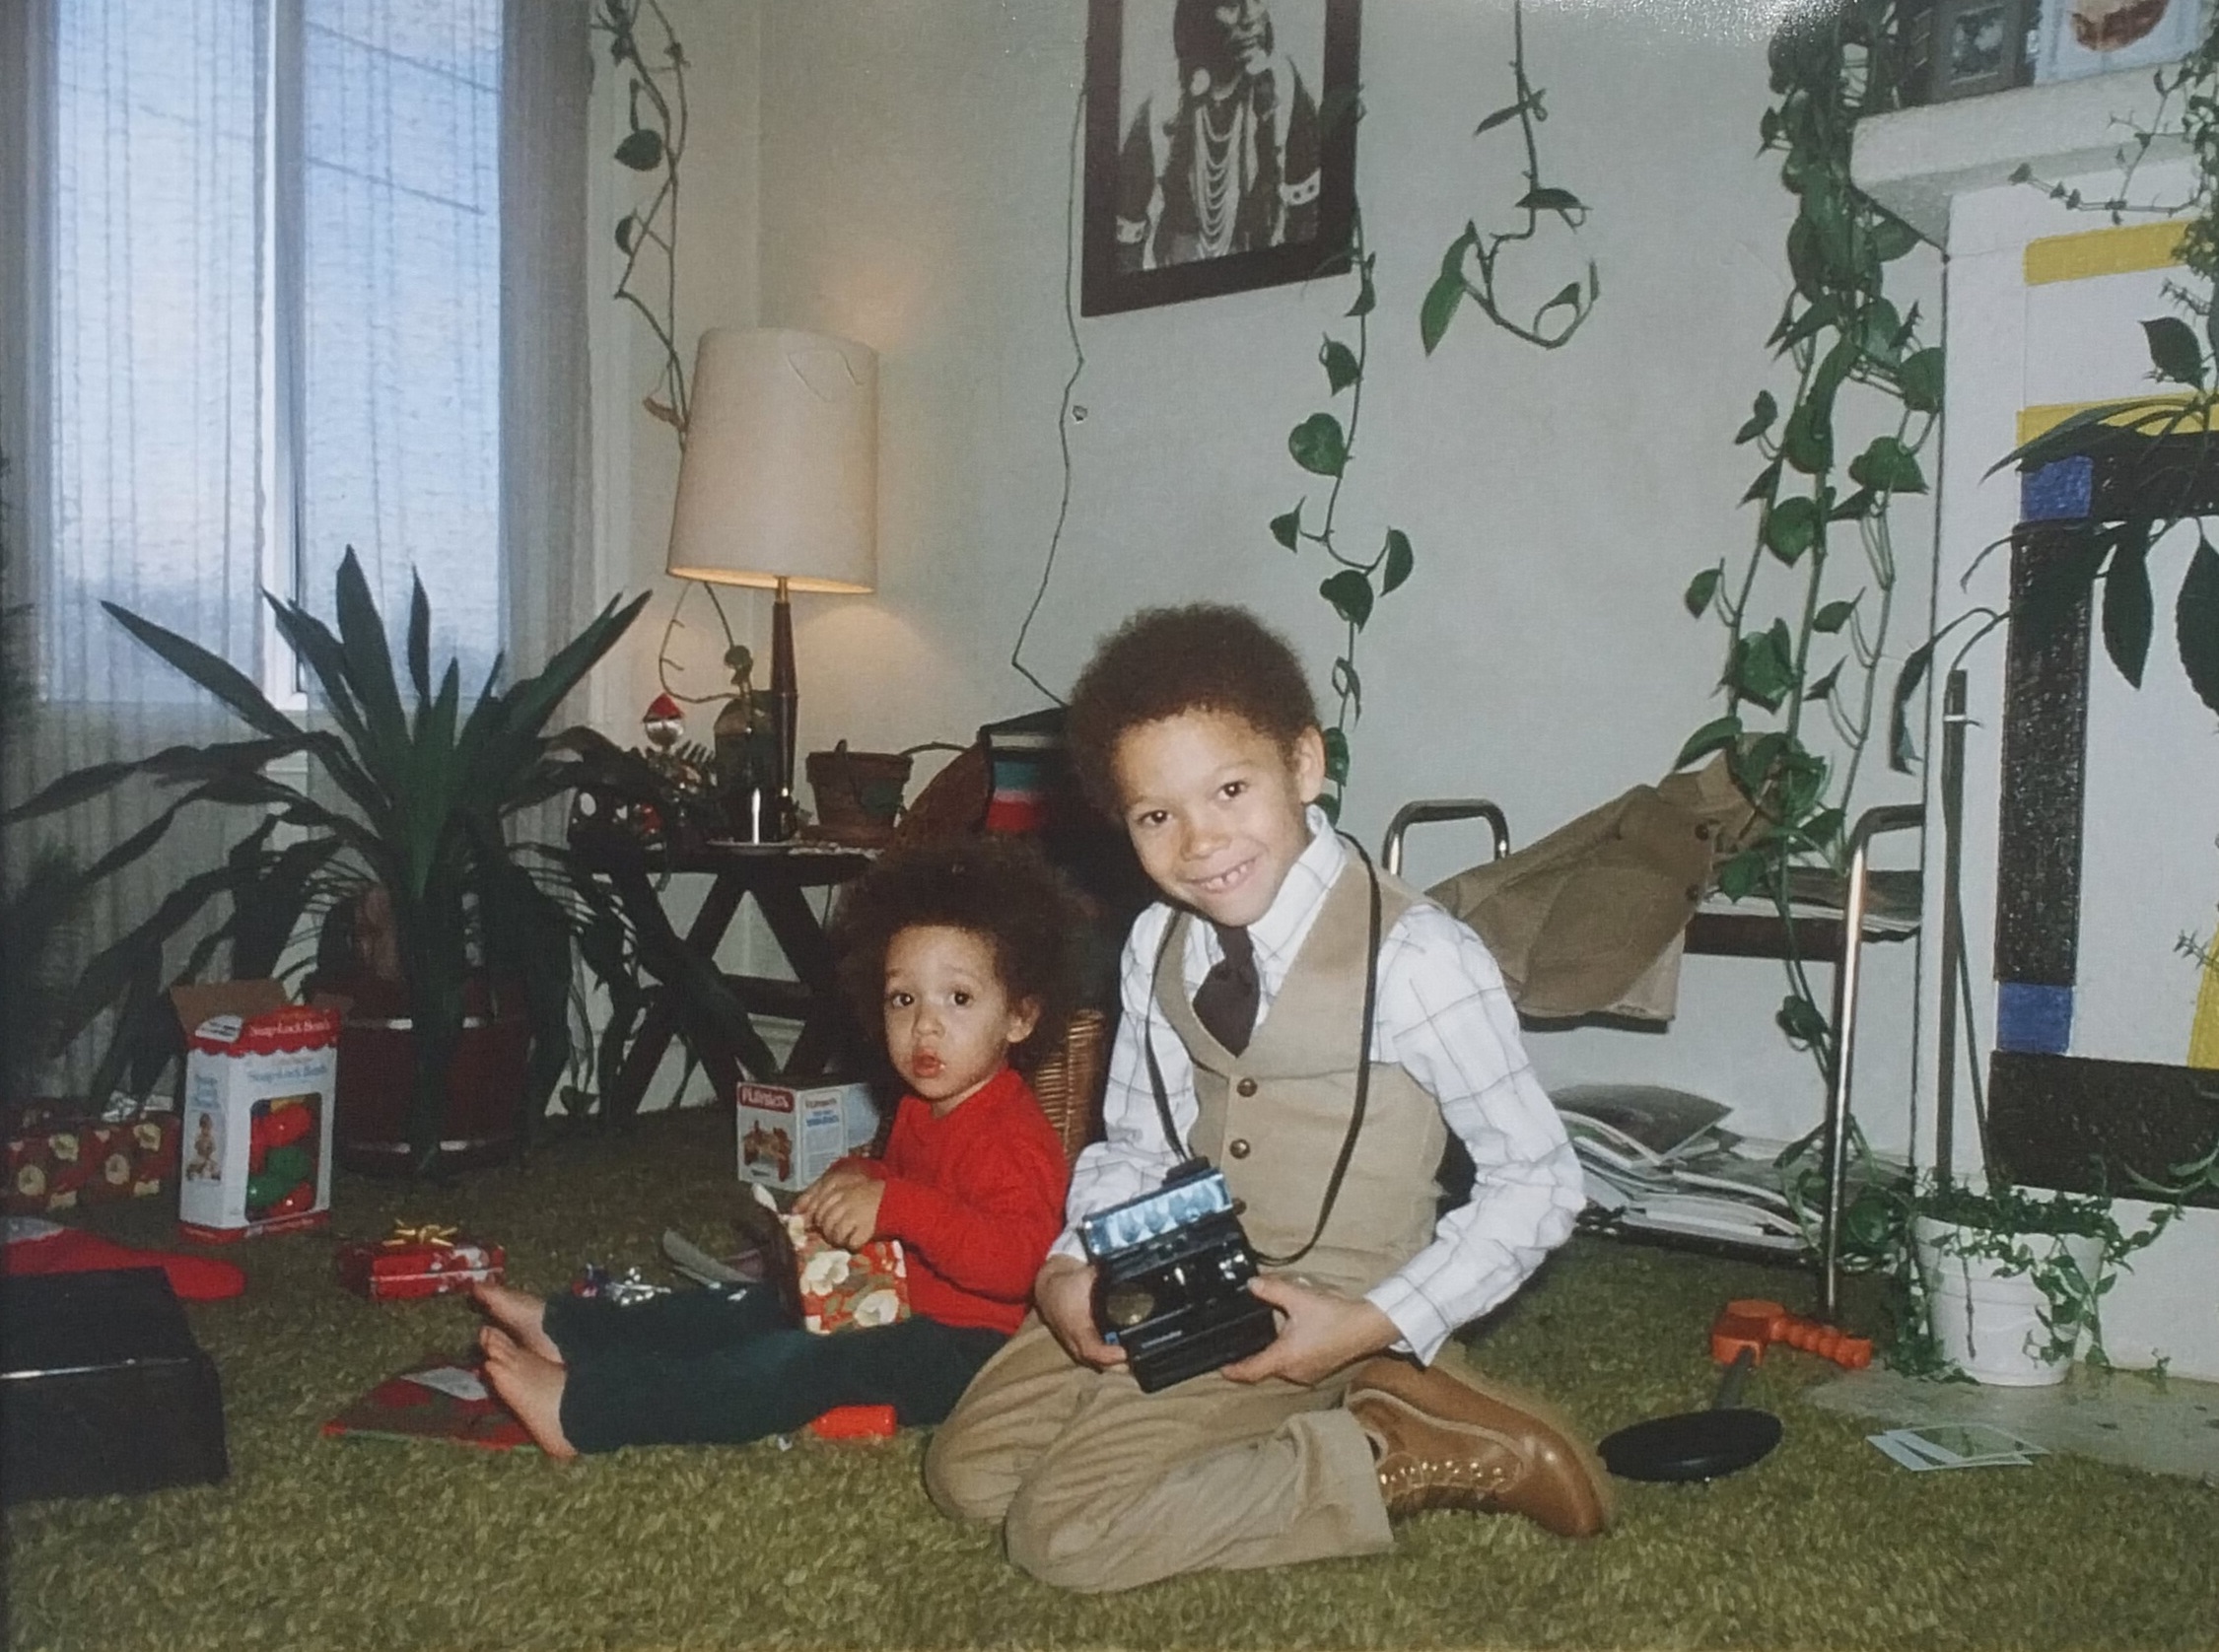 Two children sit on the floor of a comfortable living room. They are surrounded by green plants, a white lamp behind them. 